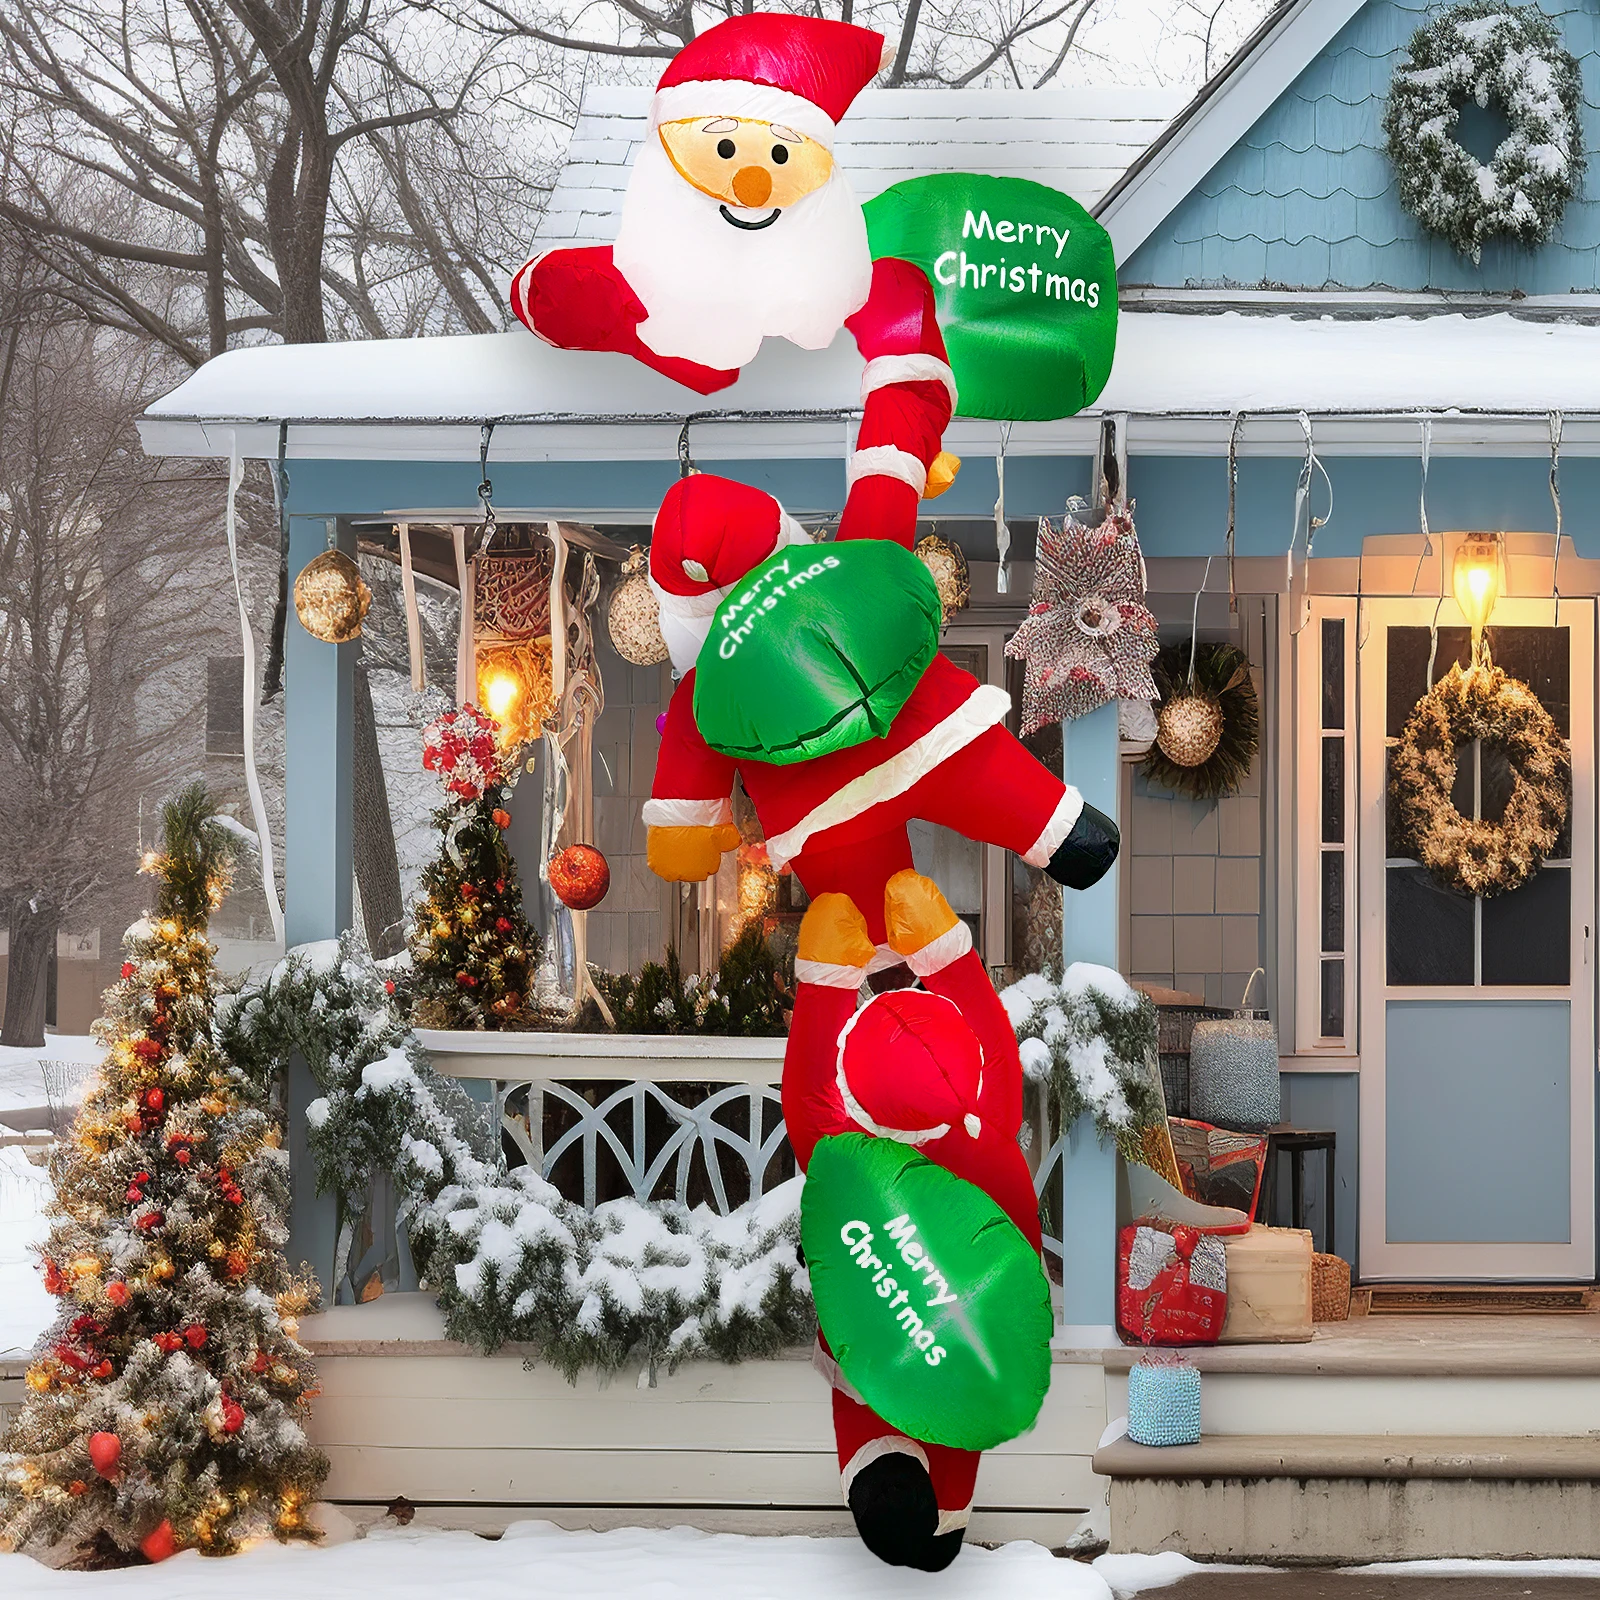 Christmas Climbing Santa Claus Inflatable with LED Lights Christmas Blow Up Yard Decorations for Outdoor Christmas Garden Decor